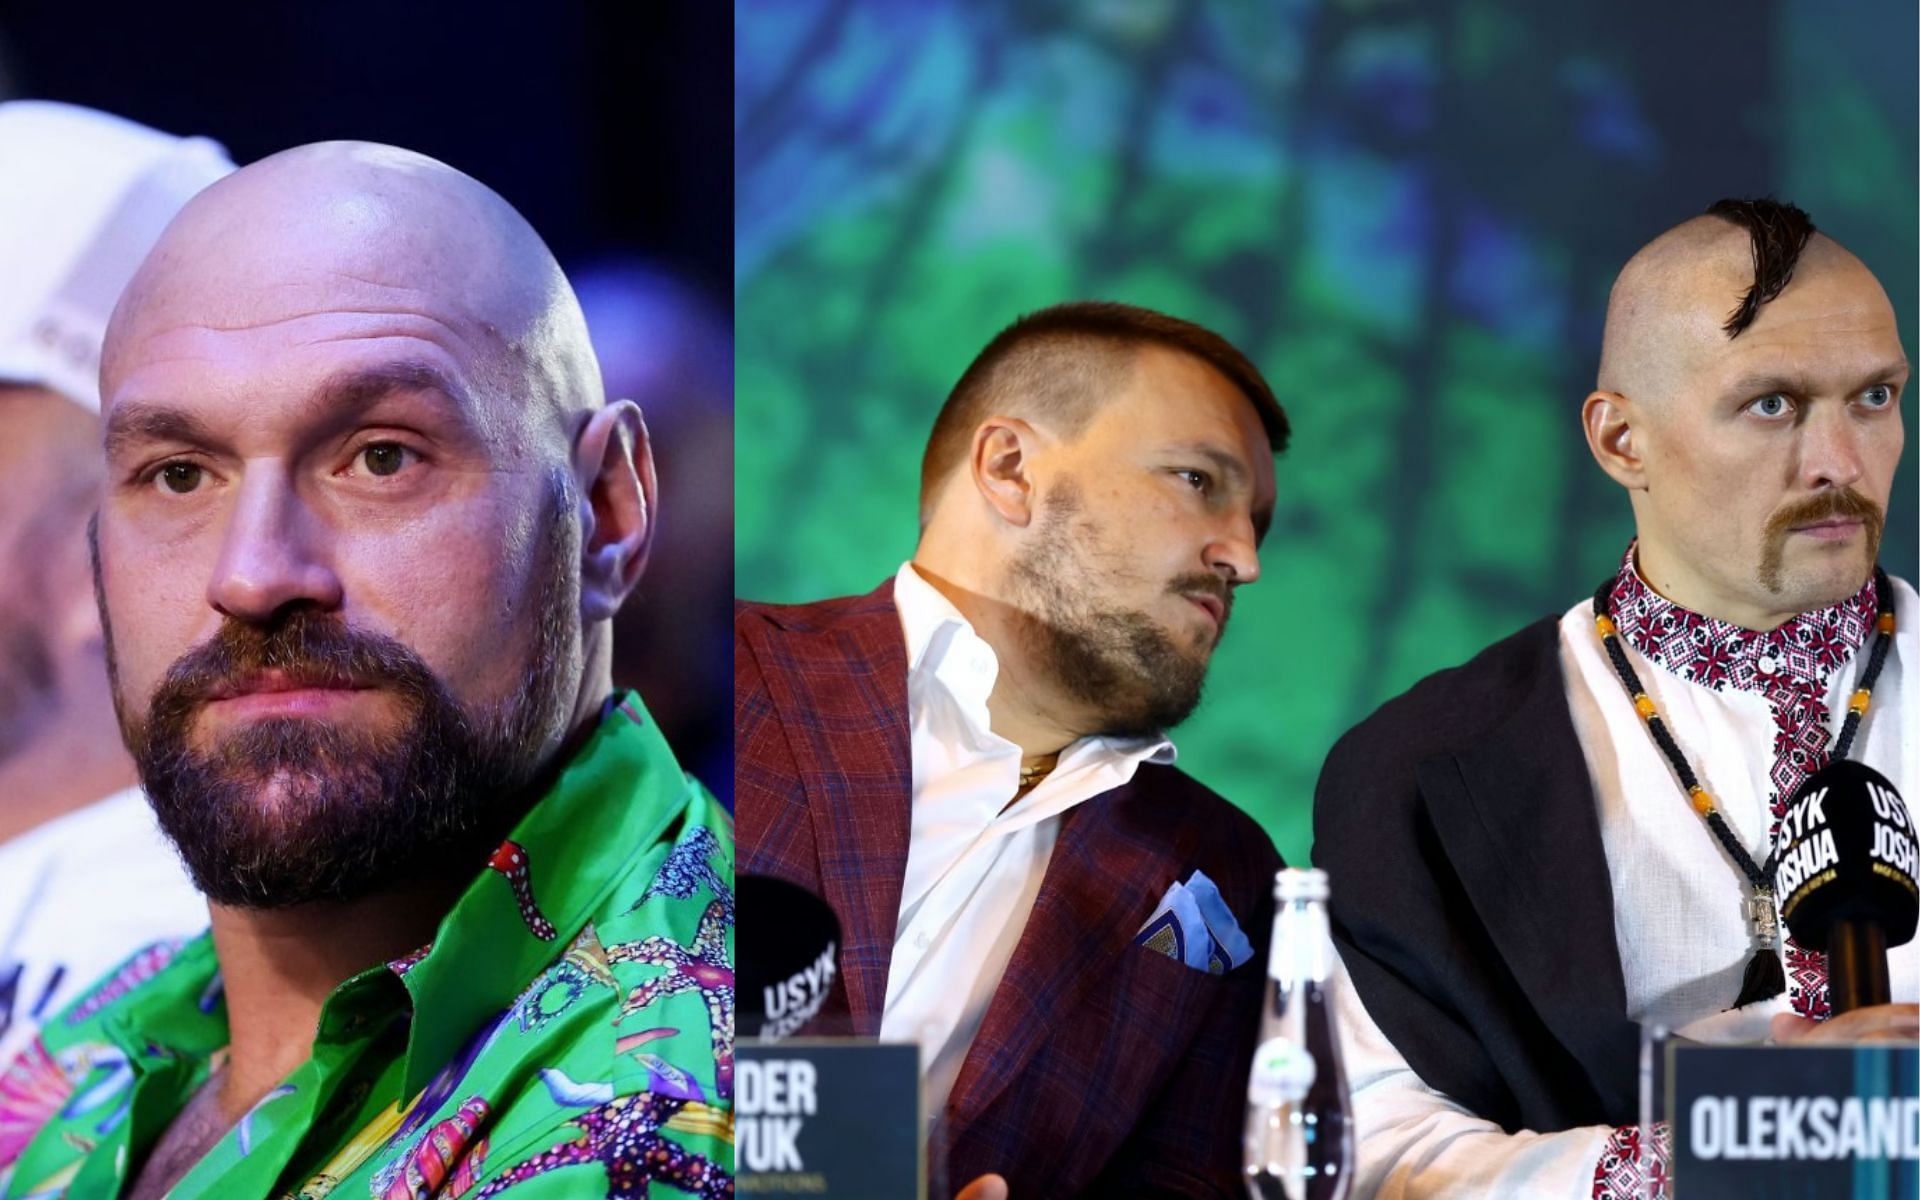 Tyson Fury (Left) and Alex Krassyuk with Oleksandr Usyk (Right) (Image Credits; Getty Images)